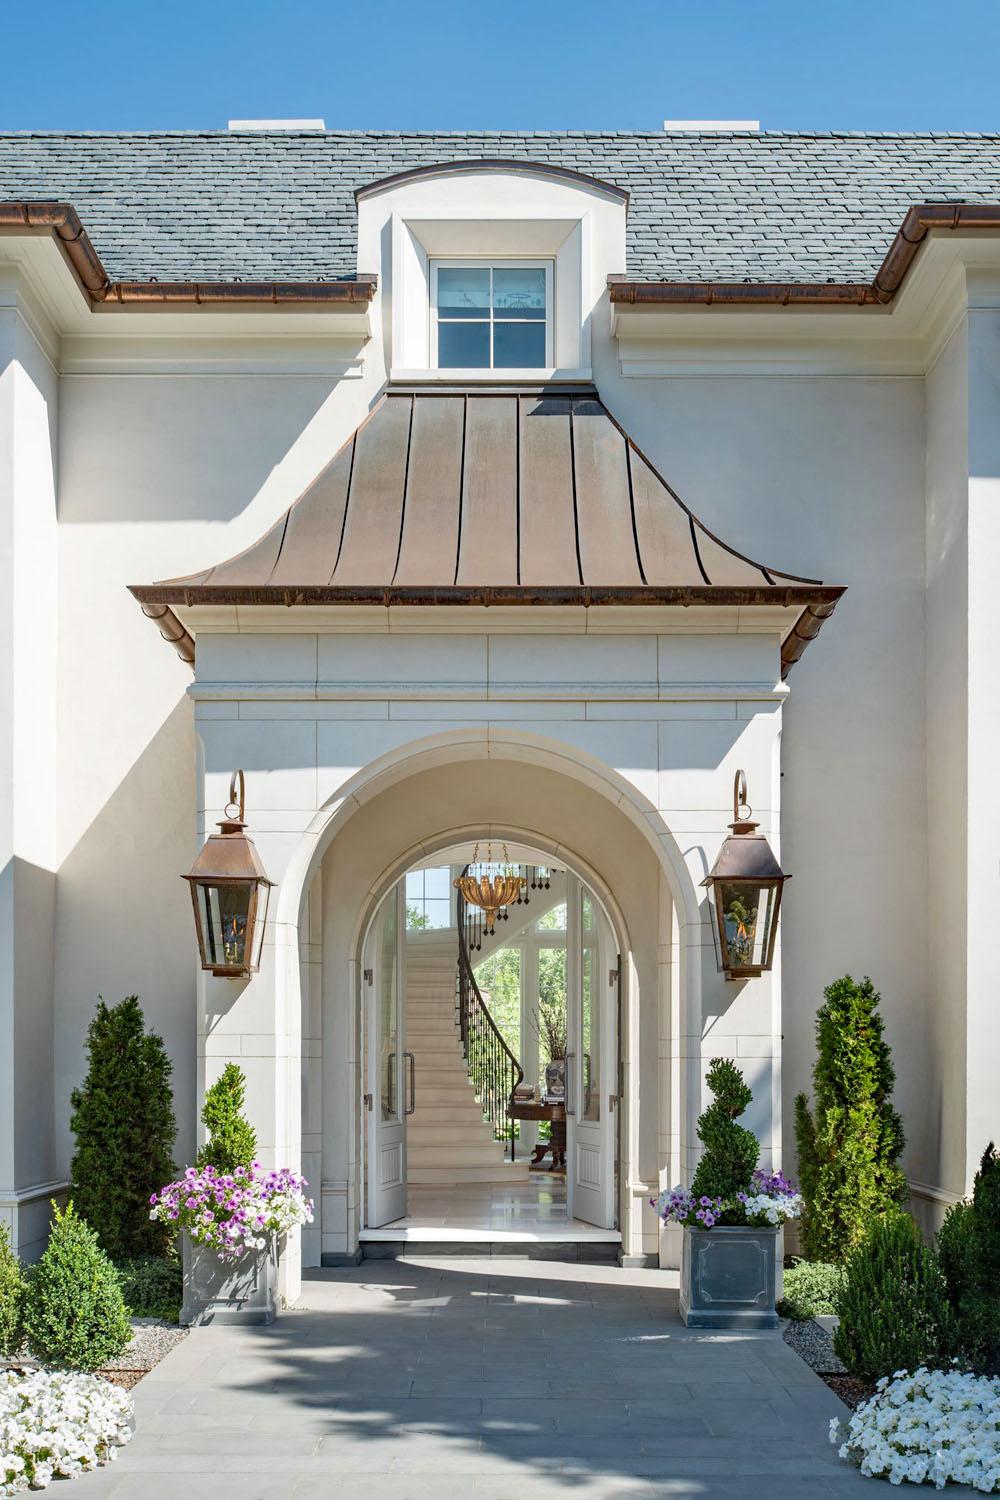 Gas lanterns flank the arched front entry with copper roof